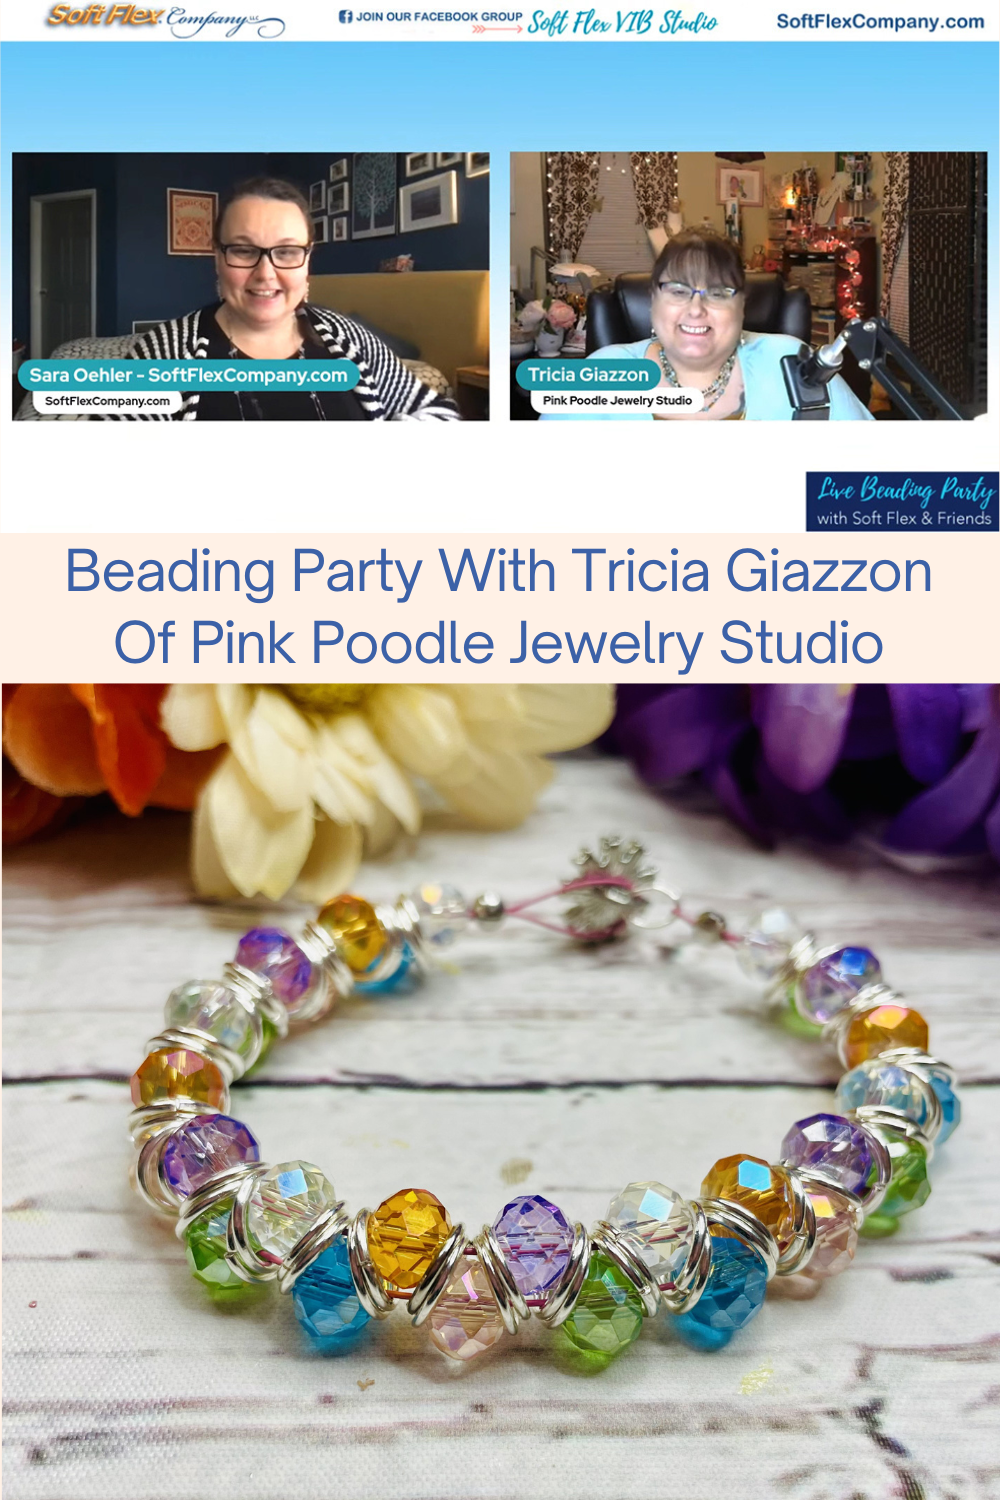 Beading Party With Tricia Giazzon Of Pink Poodle Jewelry Studio Collage